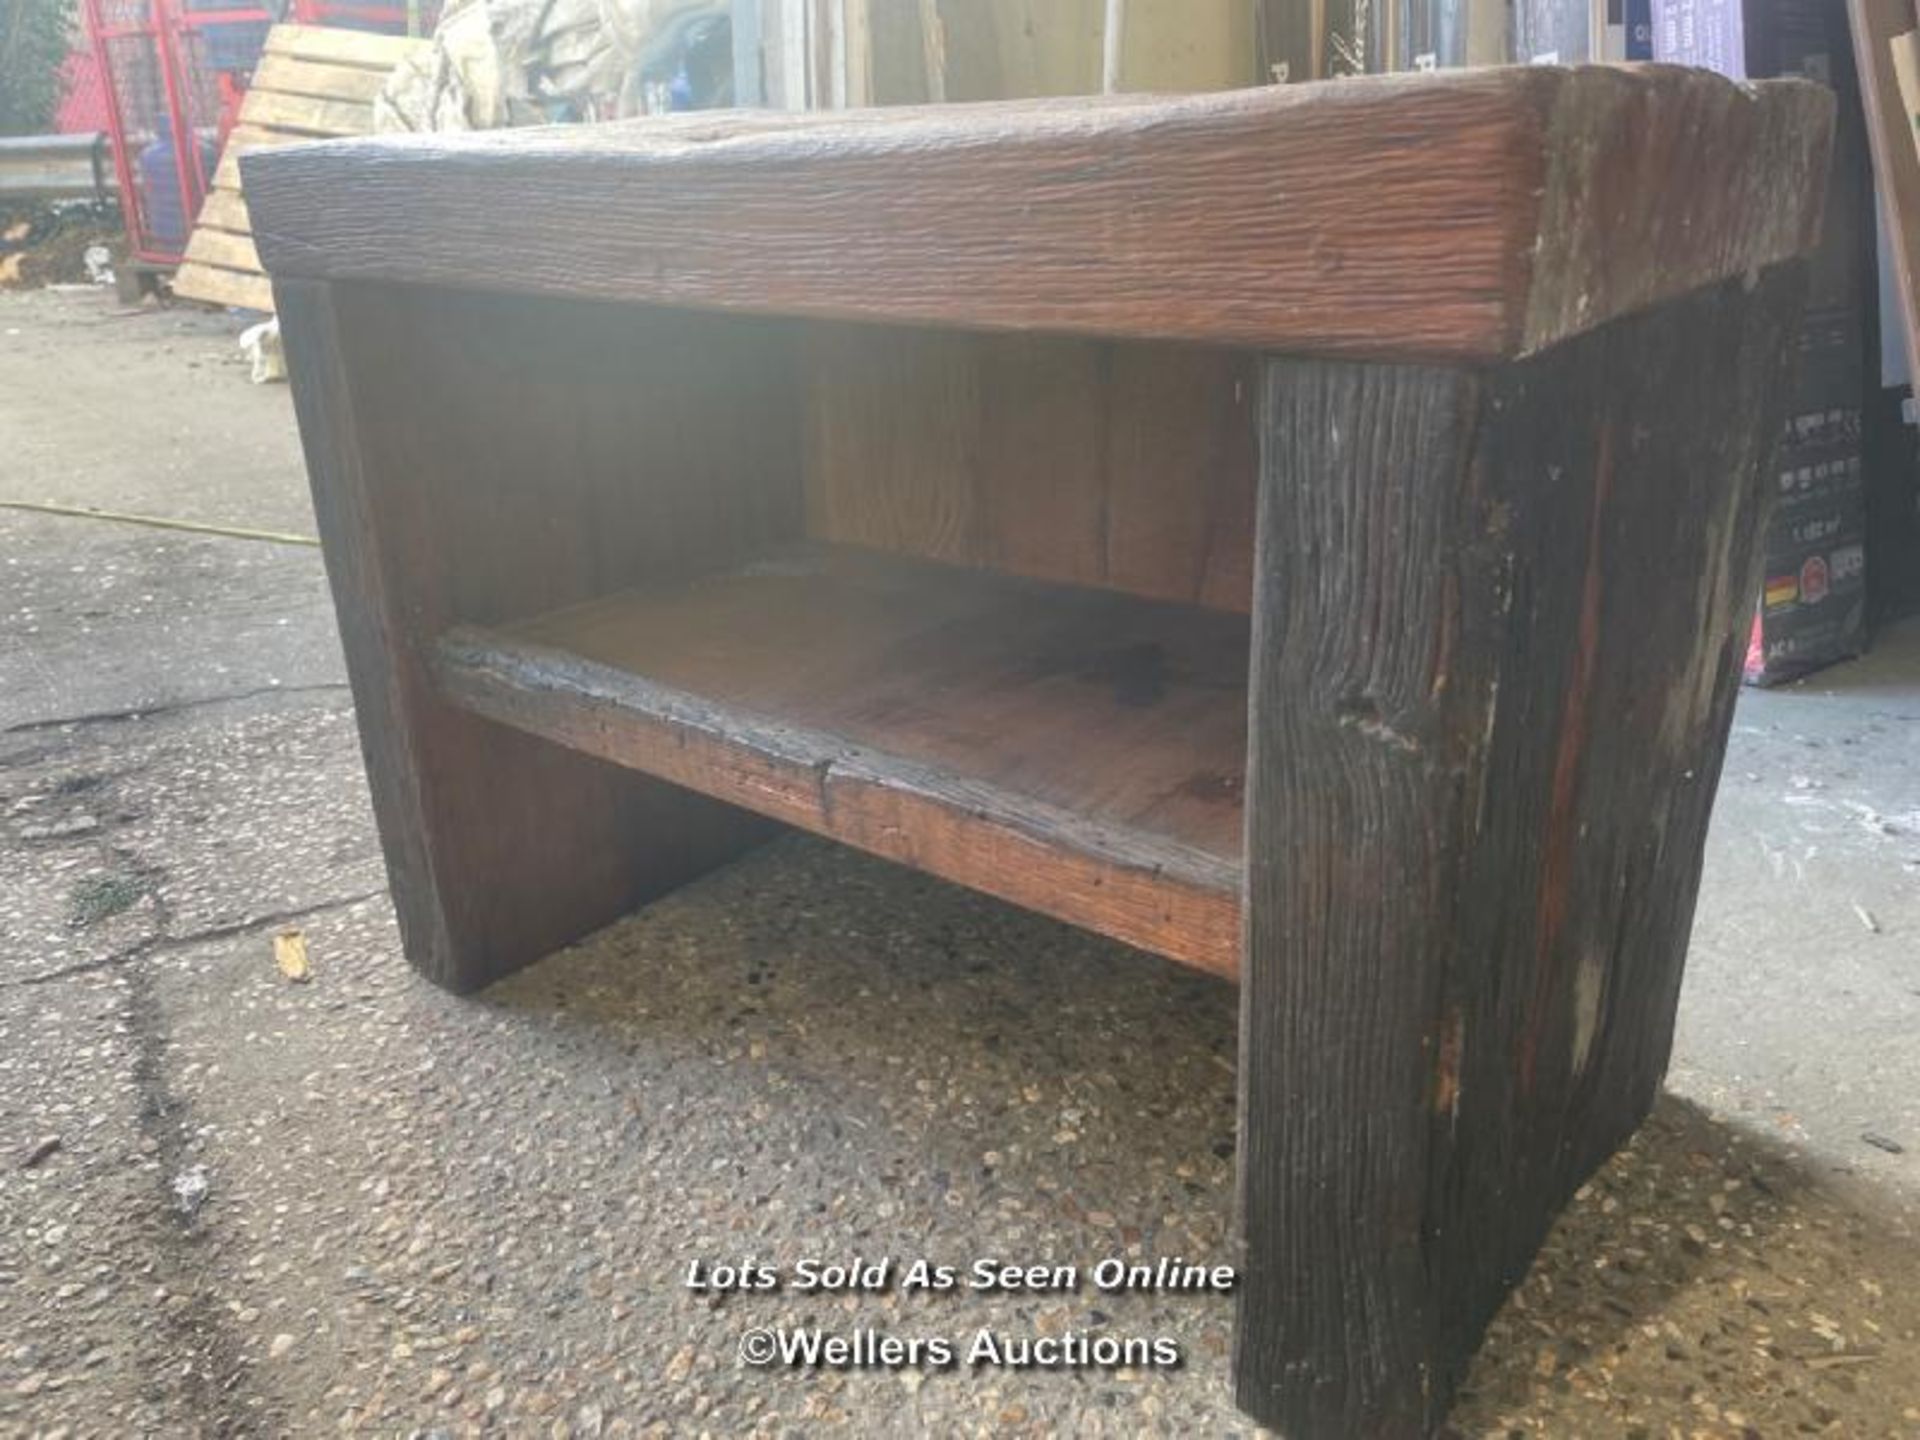 *A SMALL OAK SIDE TABLE, POSSIBLY MISSING A DRAWER. IDEAL FOR RESTORATON. 69 X 51 X 35CM